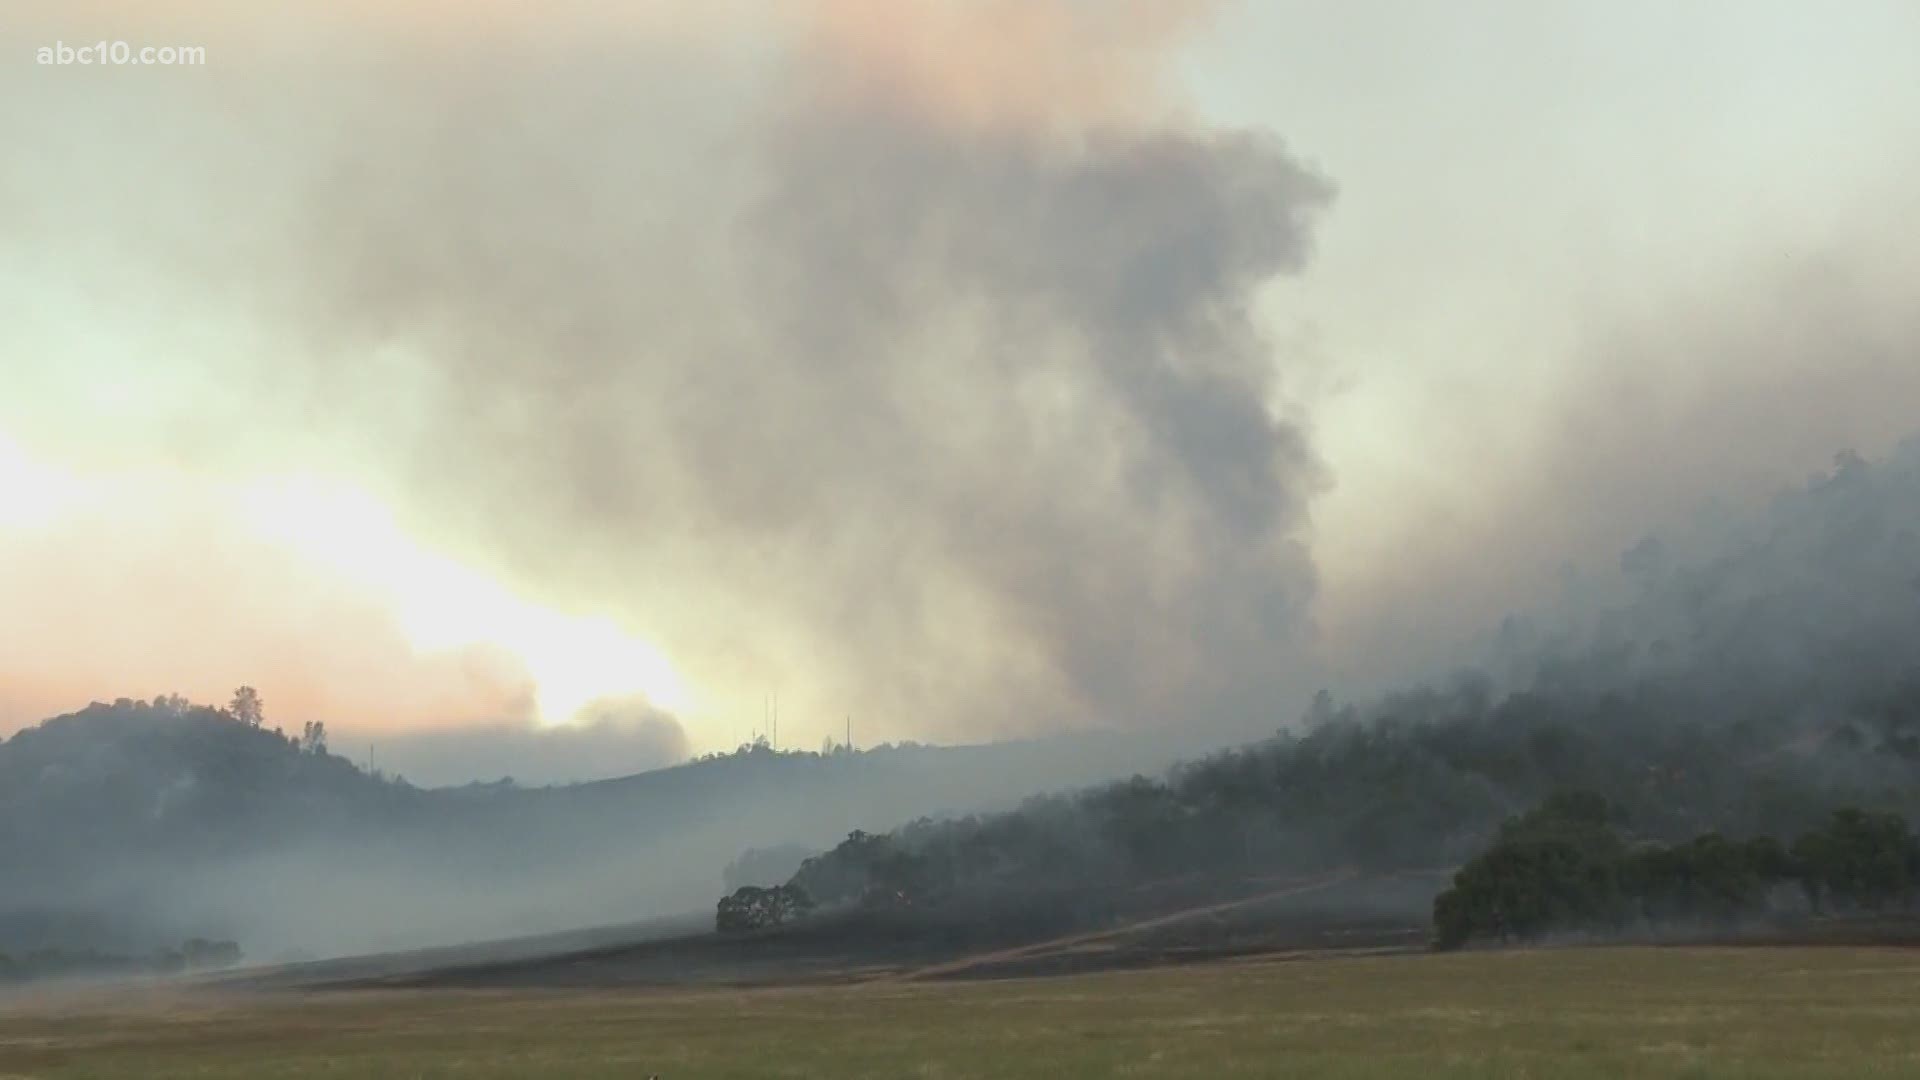 Firefighters spent the night trying to get control of the Walker Fire burning in Calaveras County. The fire has burned 1,000 acres with no containment.